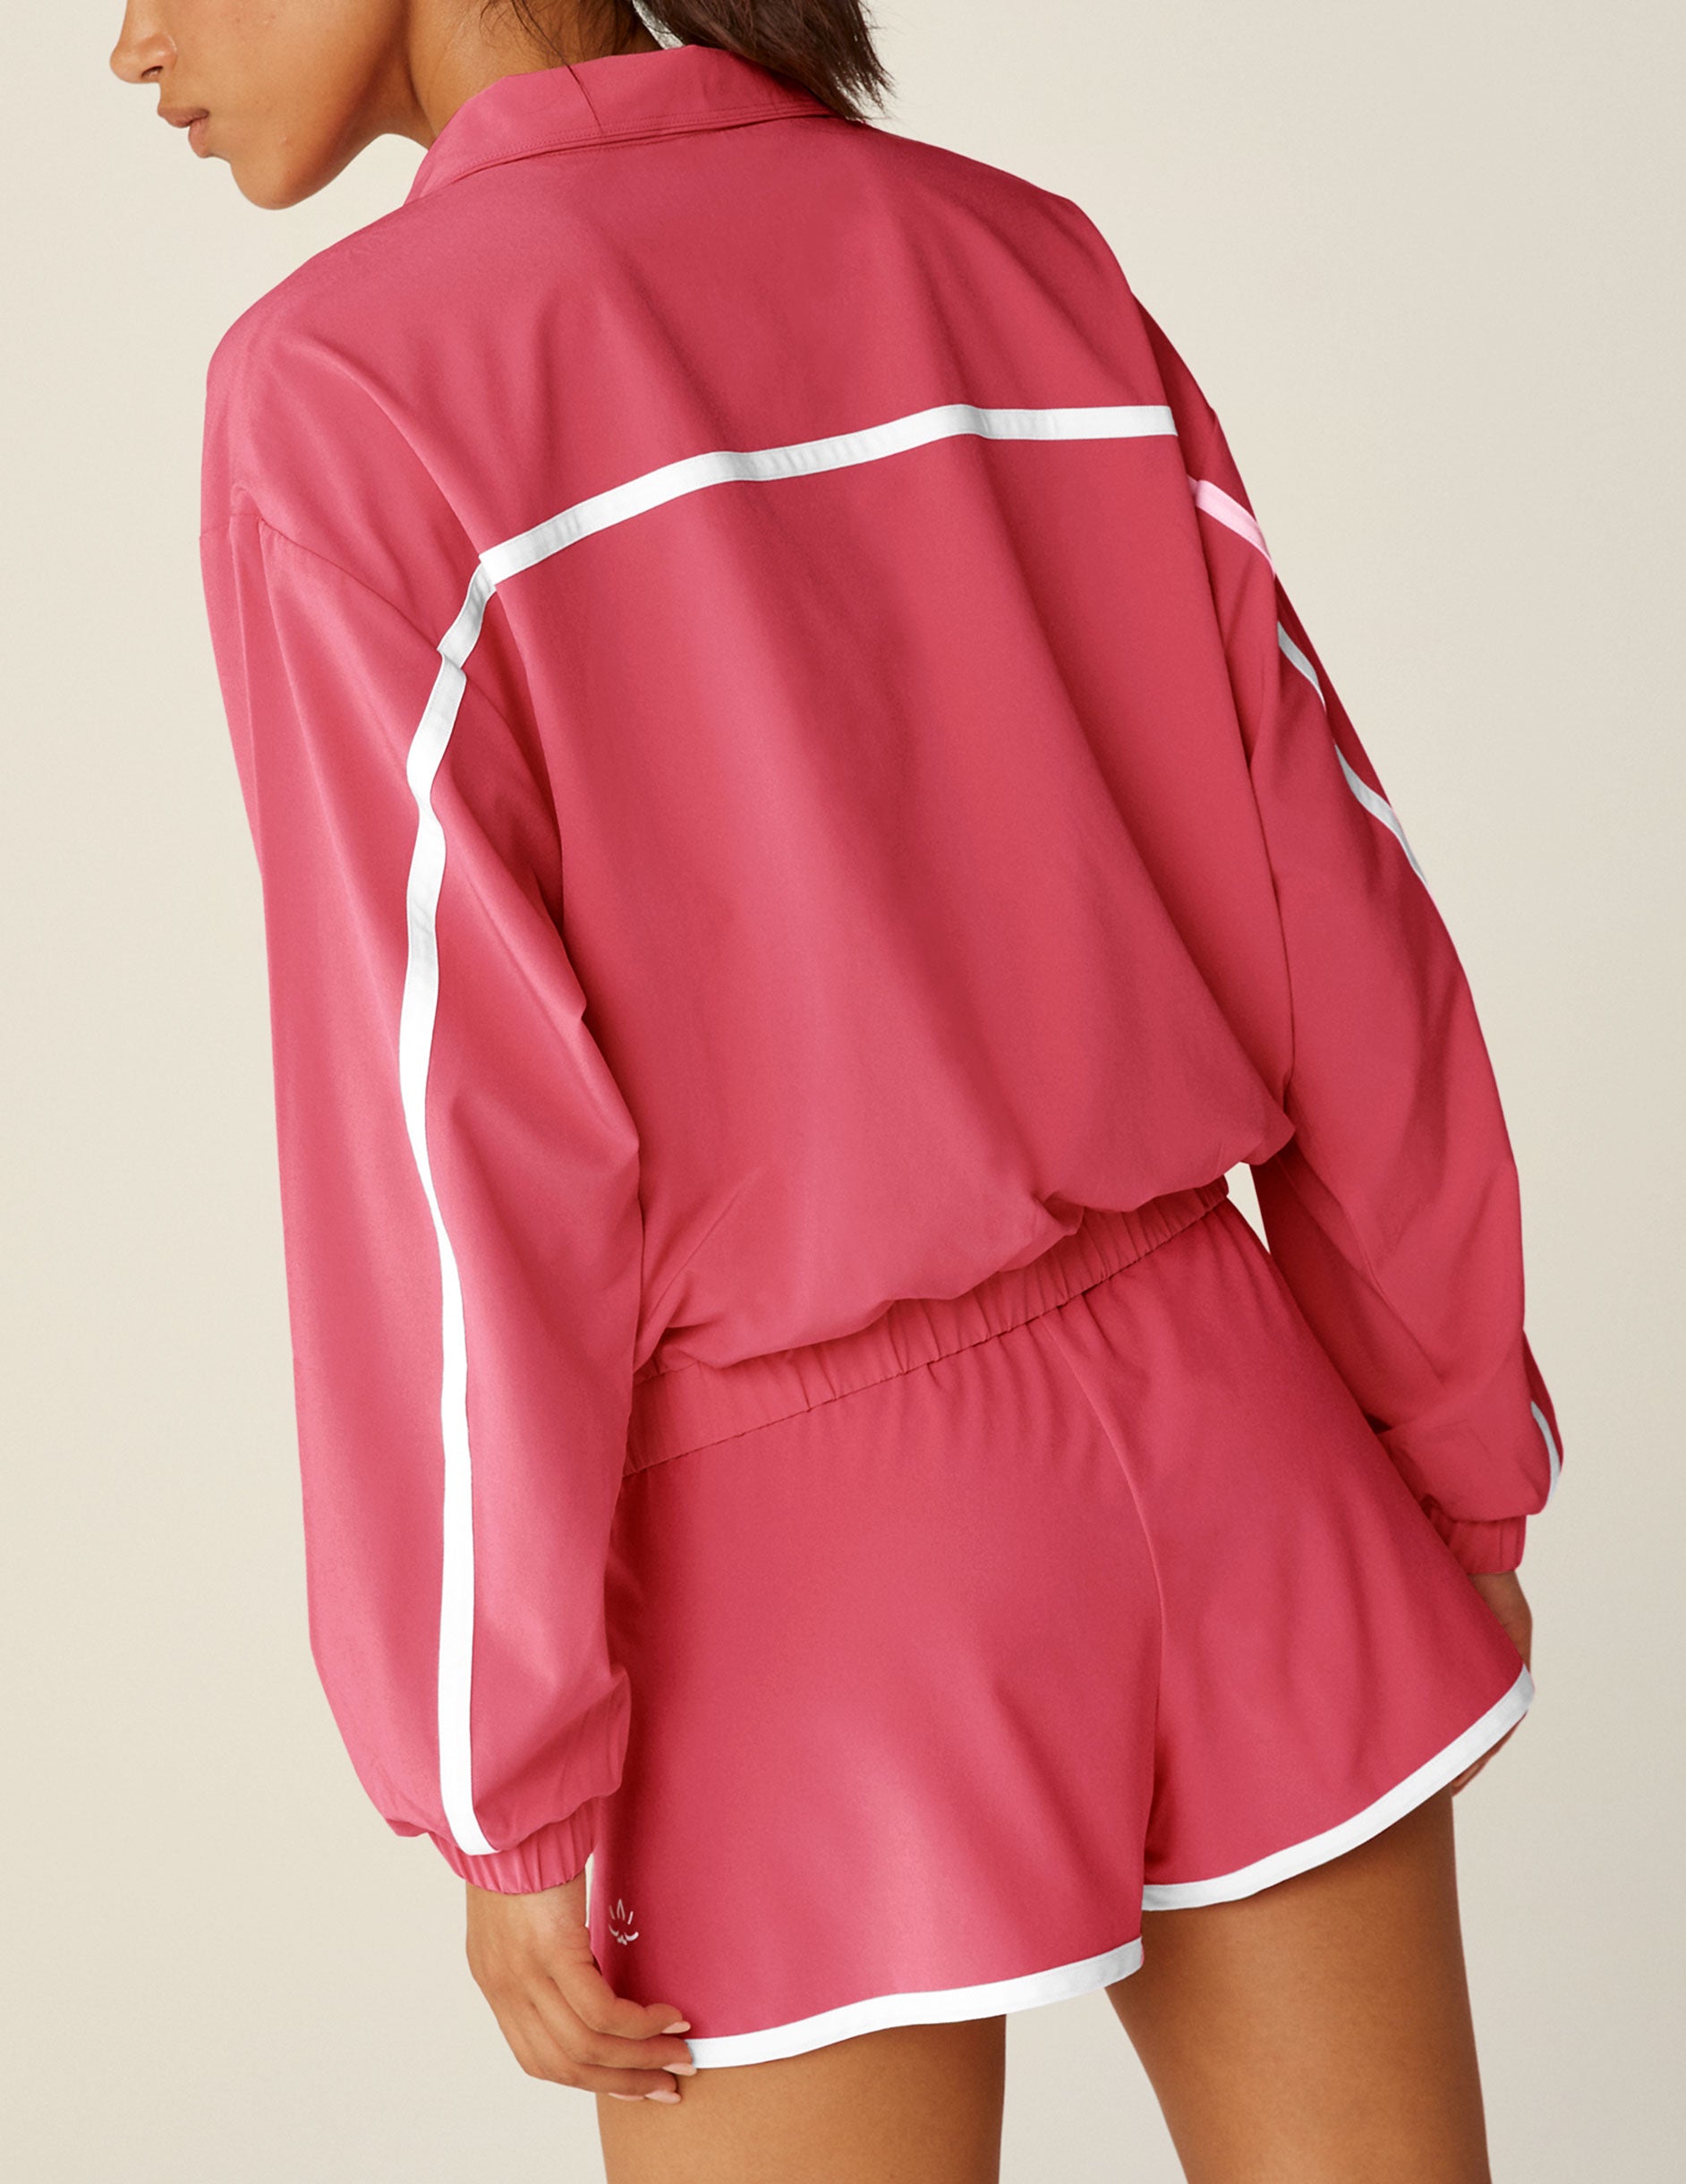 pink zip-up jacket with white trim and pockets. 